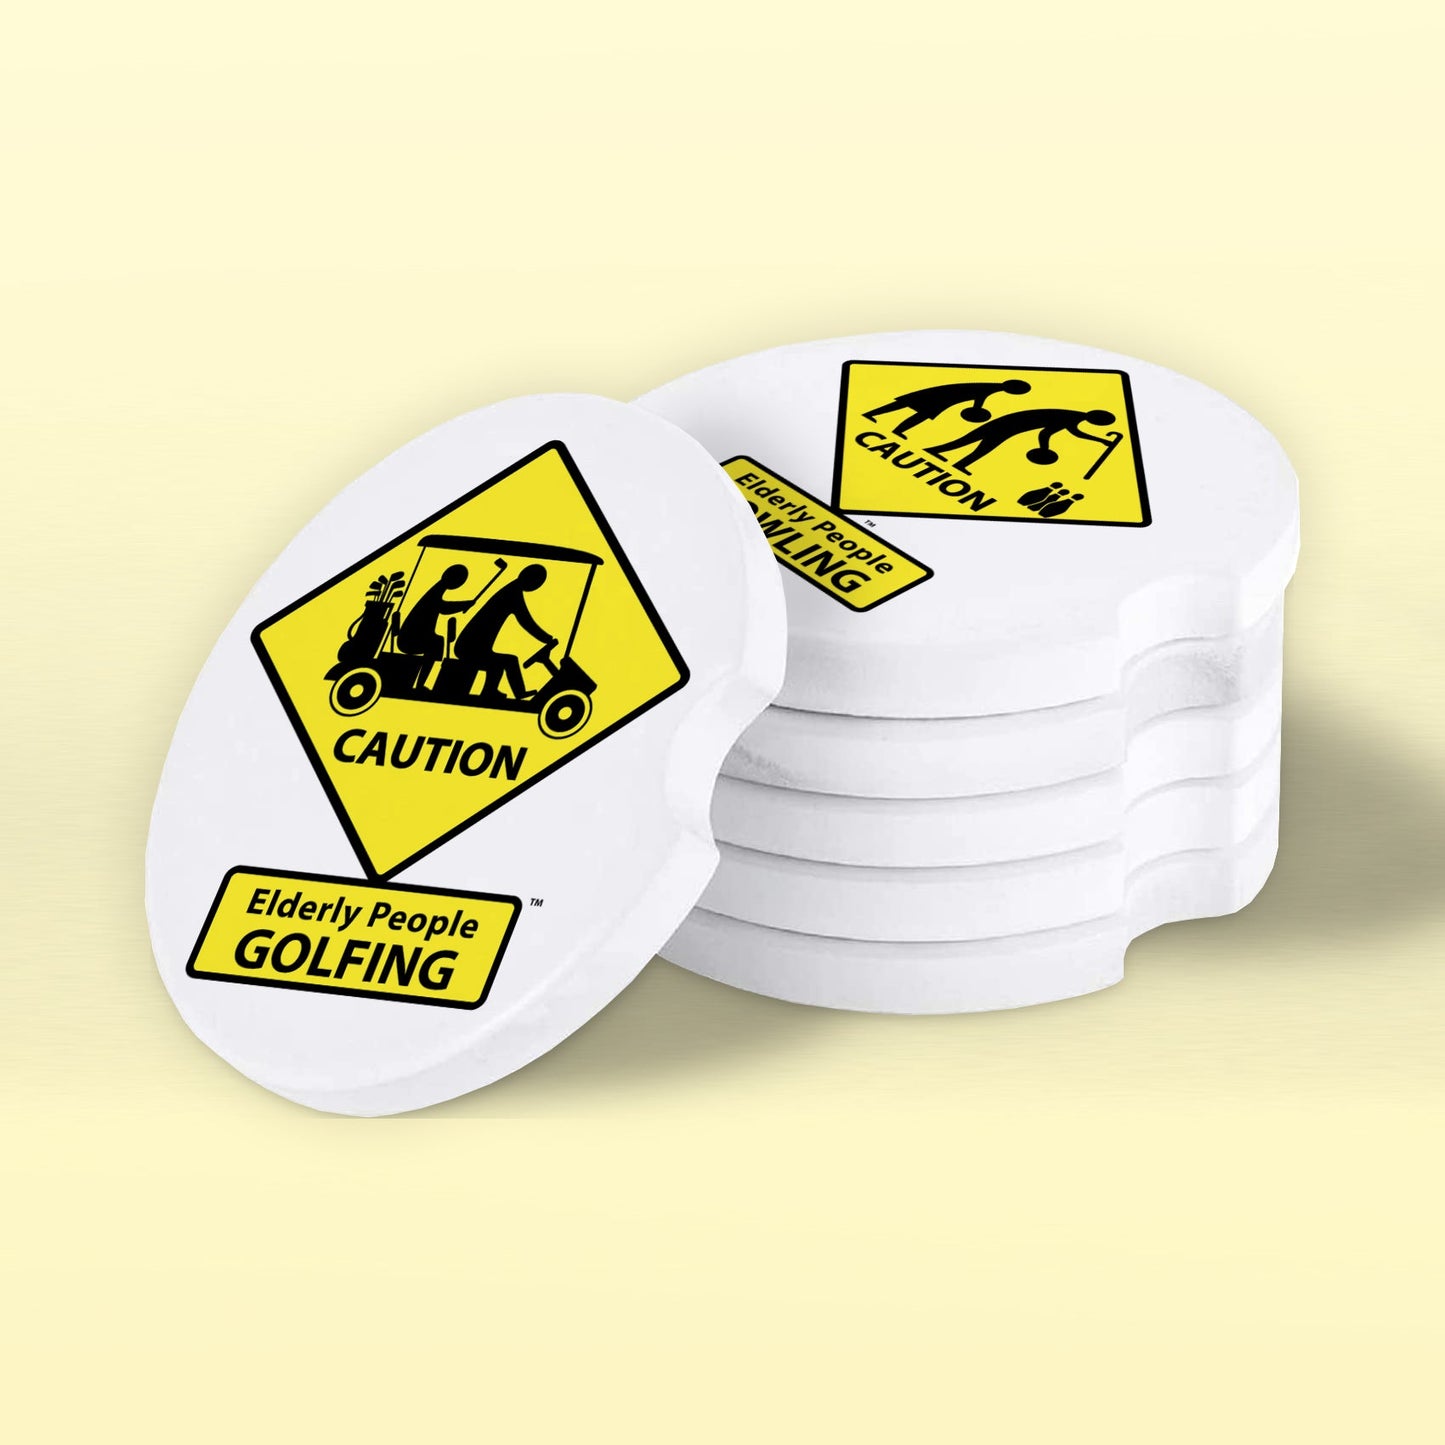 CAUTION: Elderly People BOWLING Car Coasters